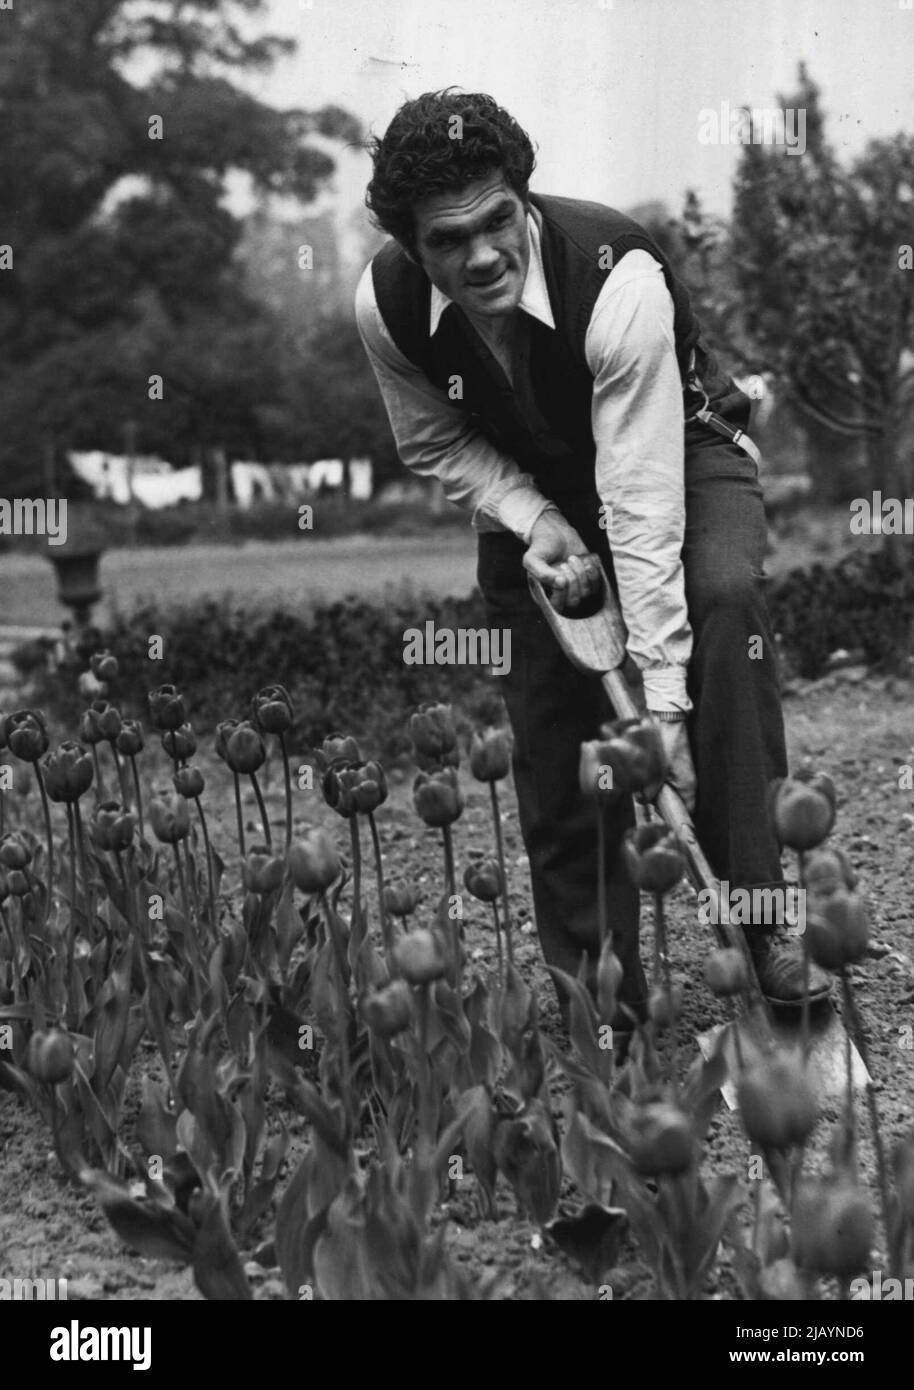 Mills Starts Training For Woodcock Fight. -- Mills puts in a spot of hard work digging in a vegetable patch beside a tulip bed in the garden of his training quarters today. Freddie Mills, the world's crusier-weight champion, began training today at a hostelry at the foot of Bexhill, a Surrey beauty spot, in preparation for his British heavyweight championship fight with Bruce Woodcock. May 12, 1949. (Photo by Fox). Stock Photo